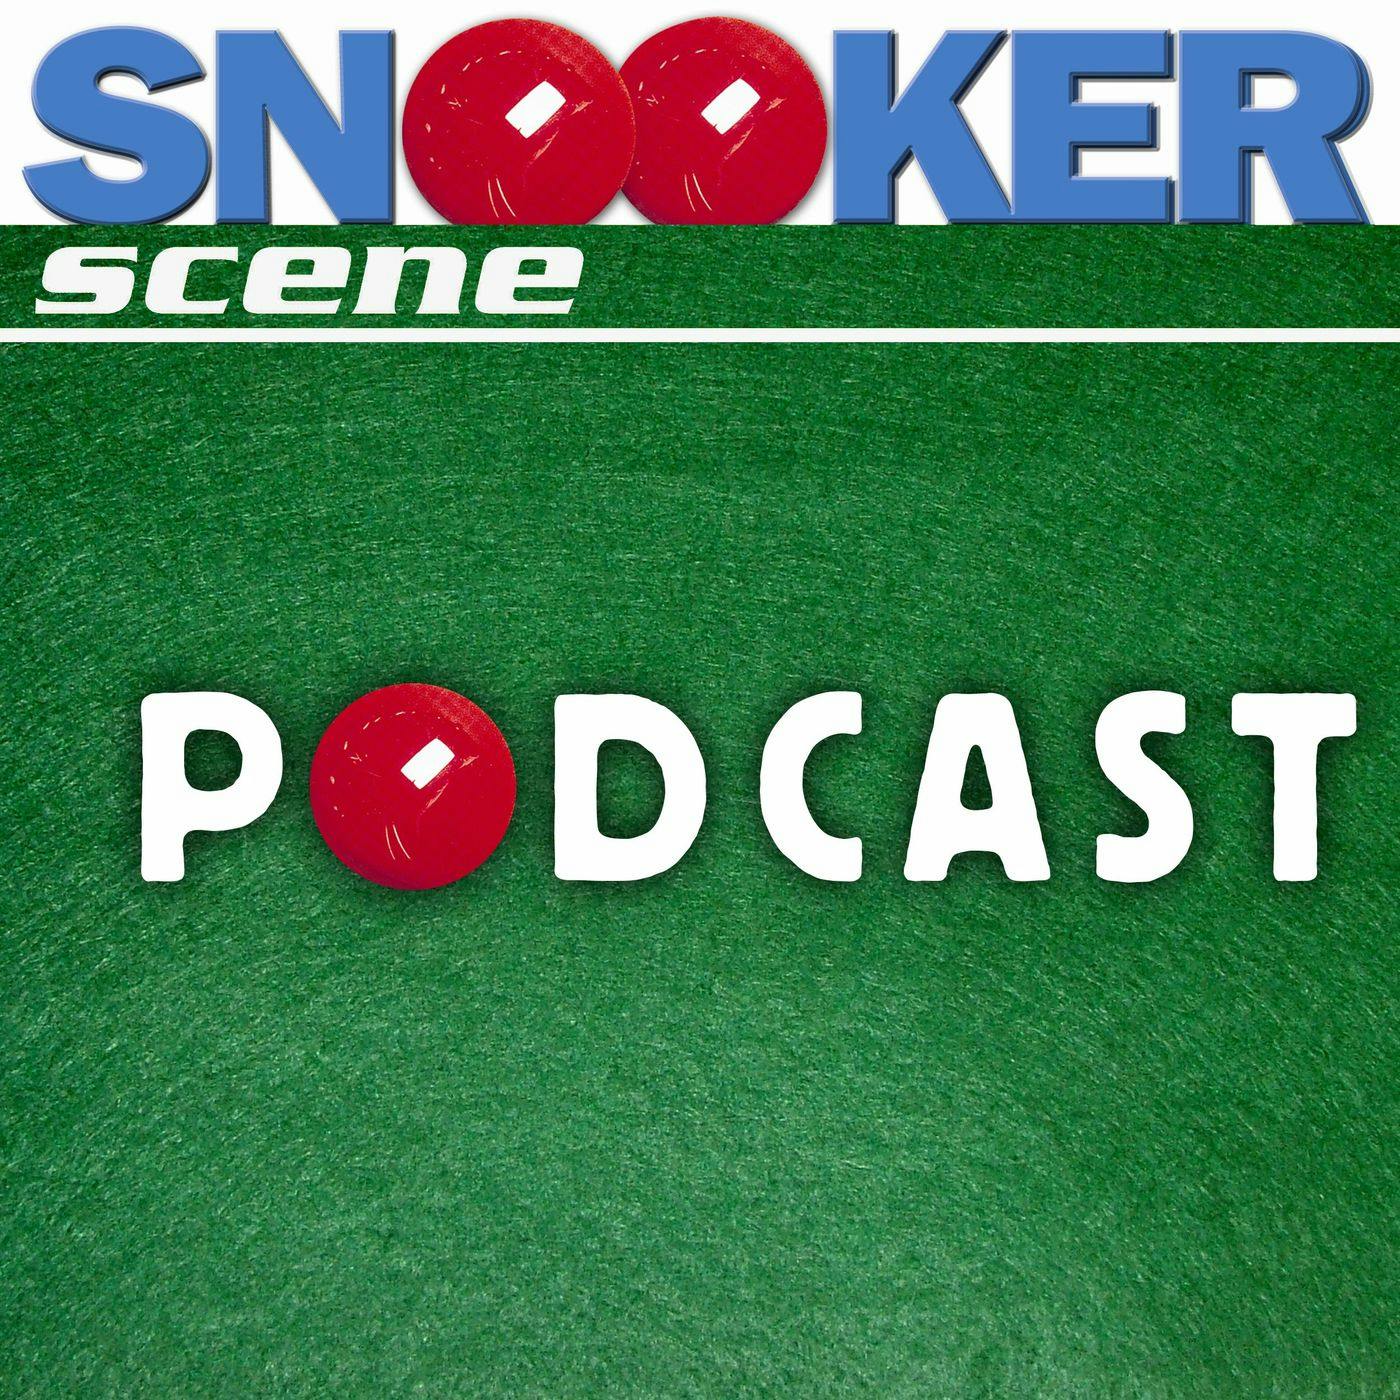 Snooker Scene Podcast episode 65 - Interviewing players